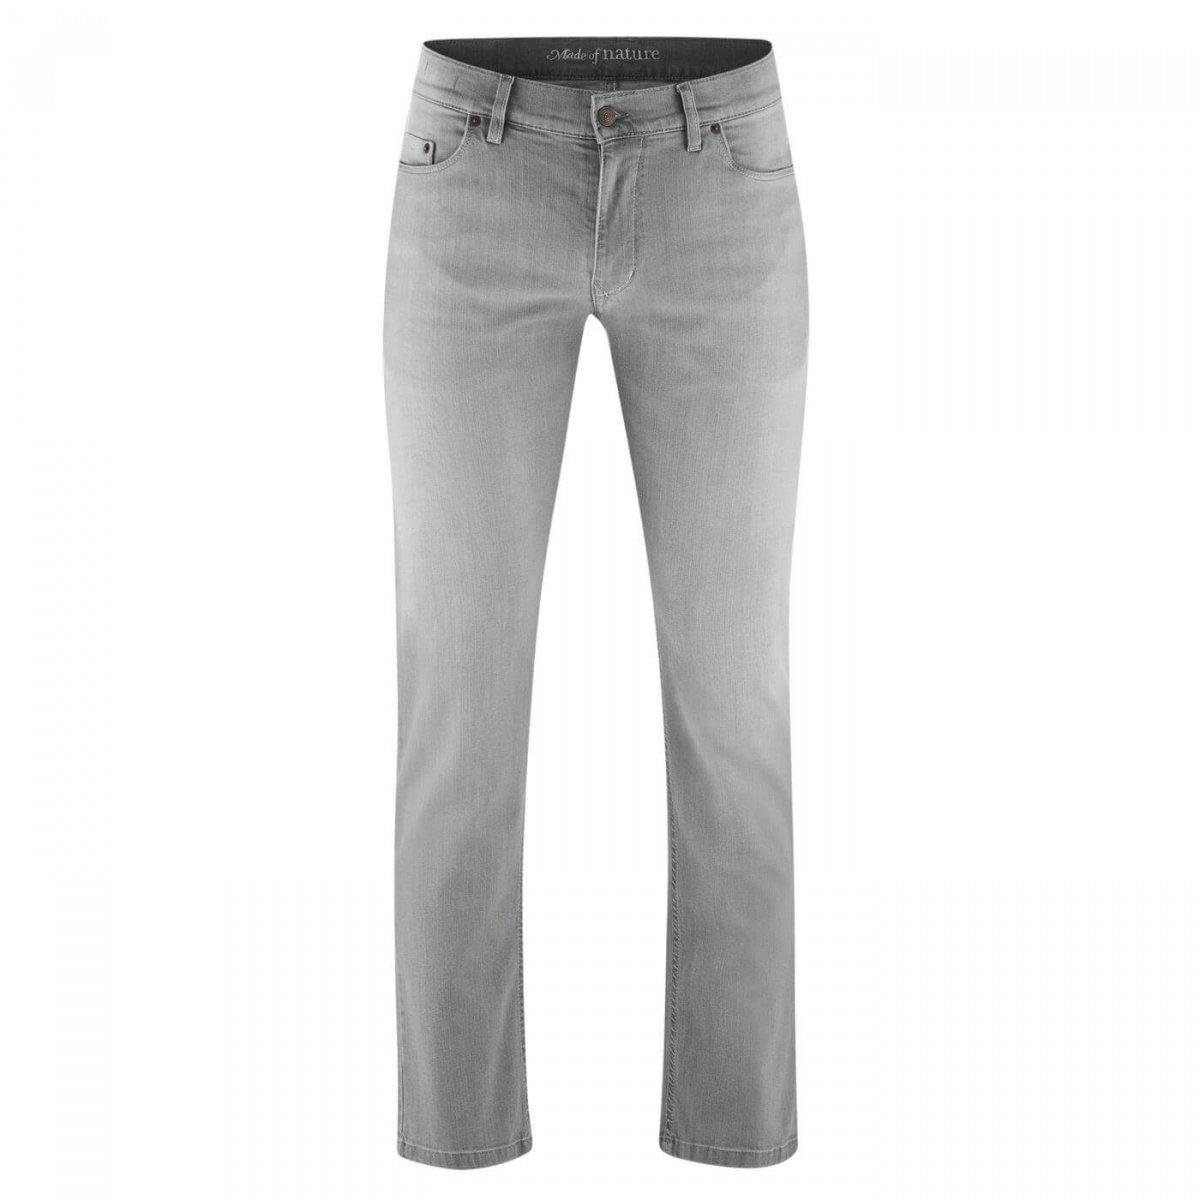 Jeans Bosco grey washed in organic cotton